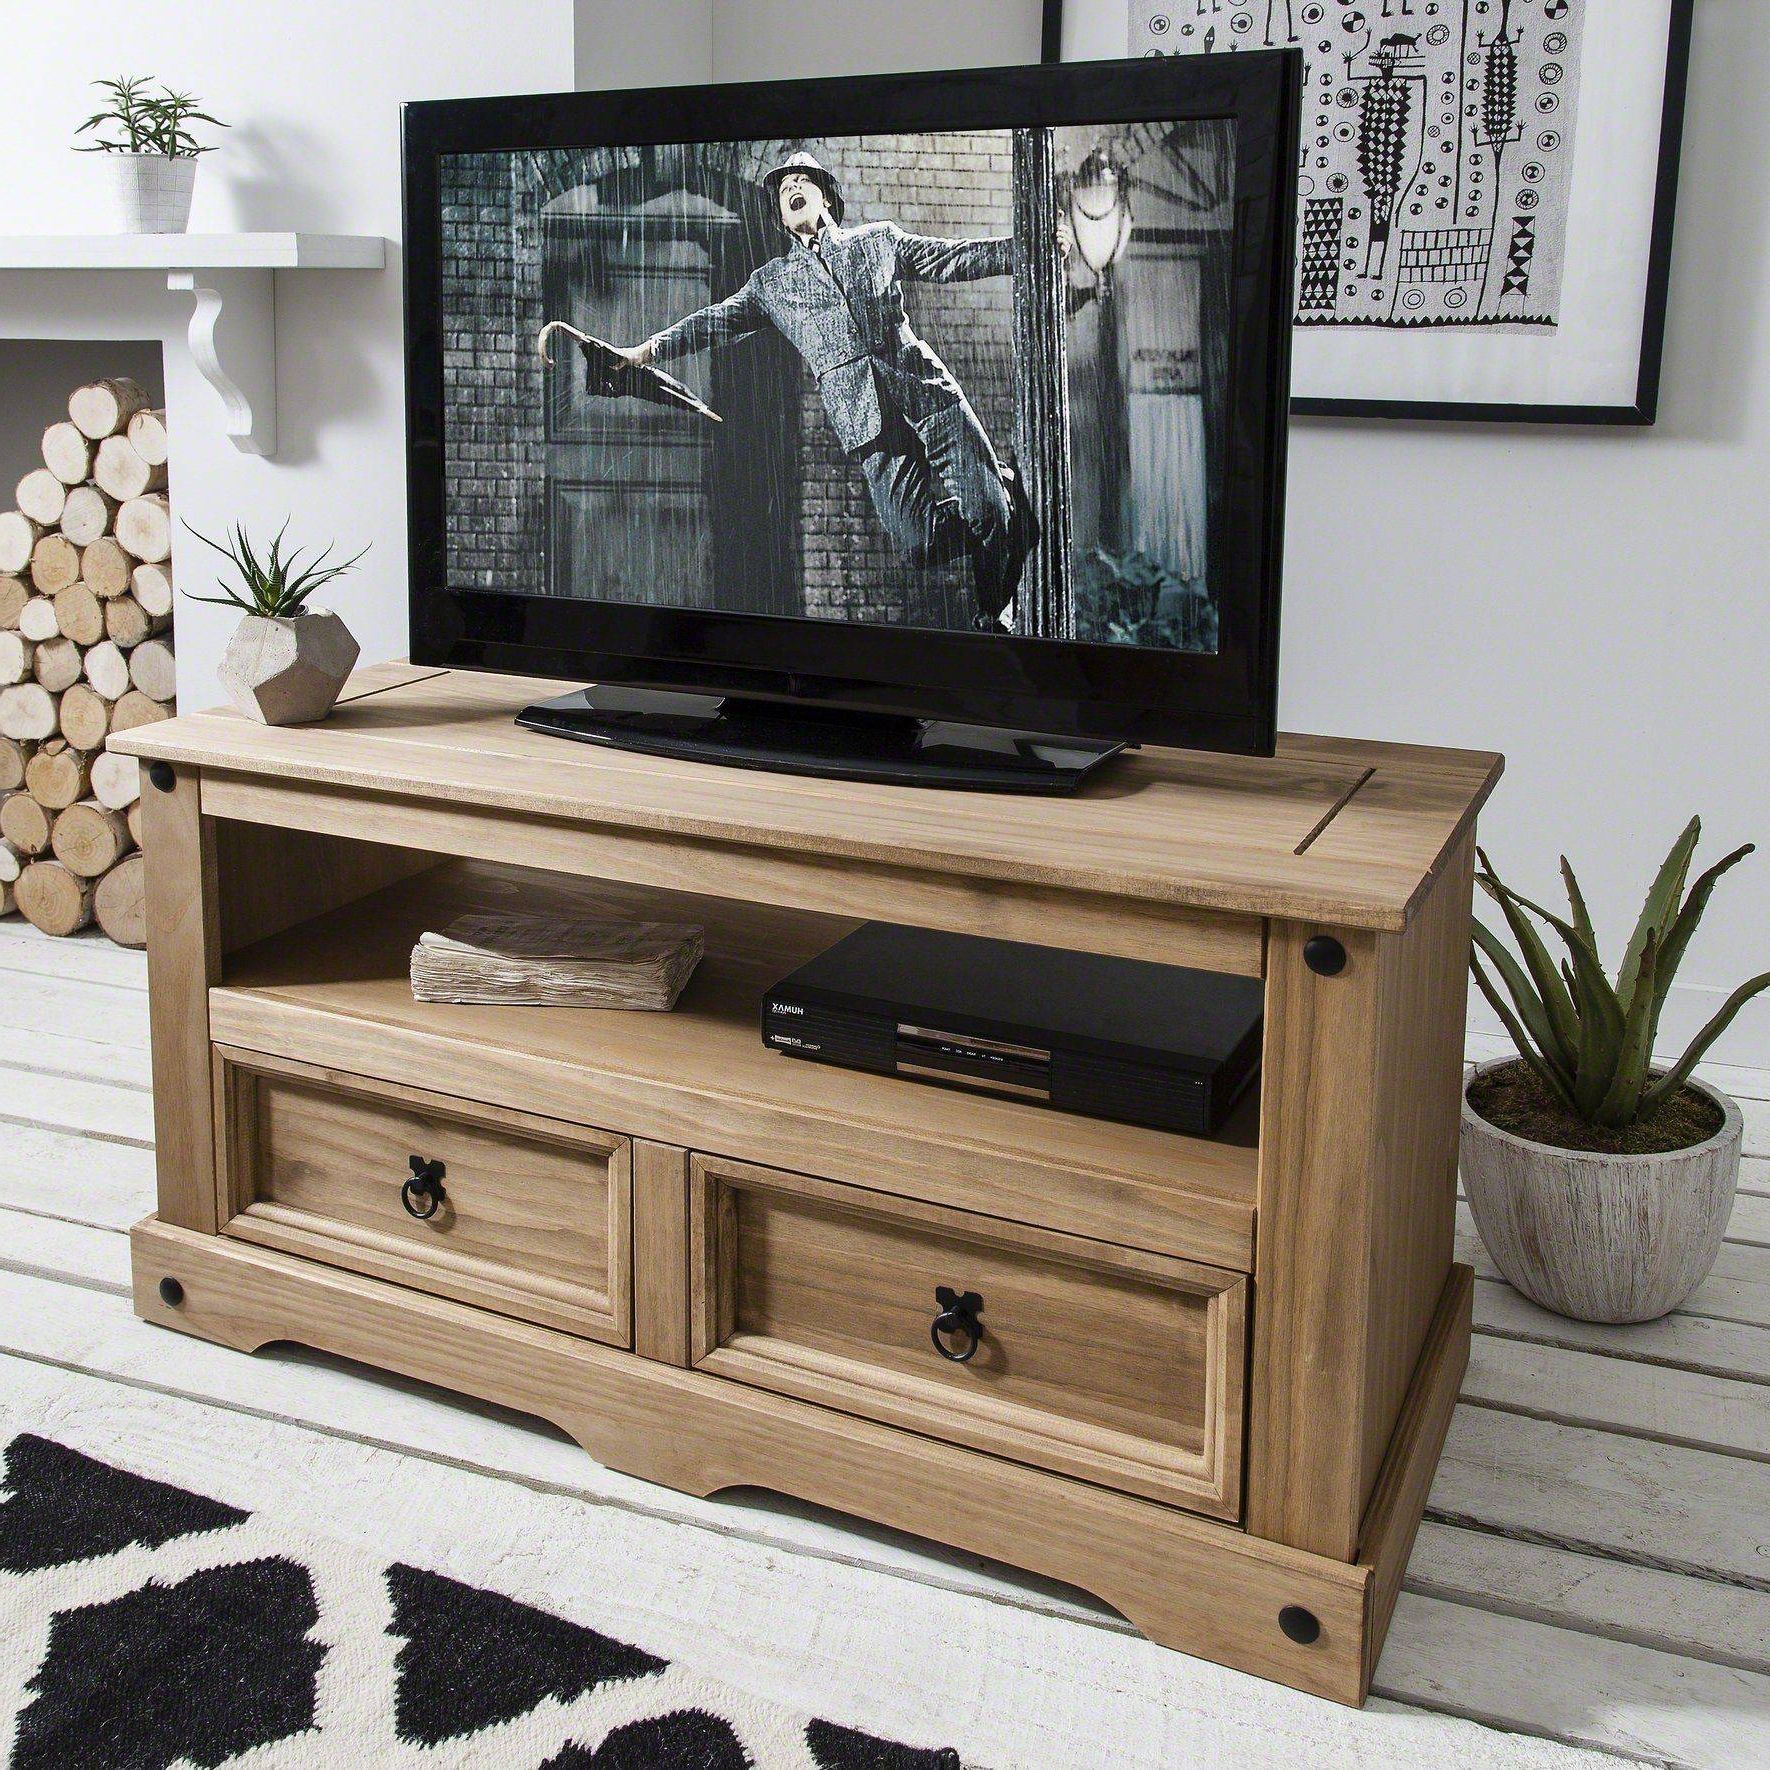 Unique Tv Stands For Flat Screens For Popular Cheap Flat Screen Tv Stands Unique Laura James Flat Screen Tv Unit (View 19 of 20)